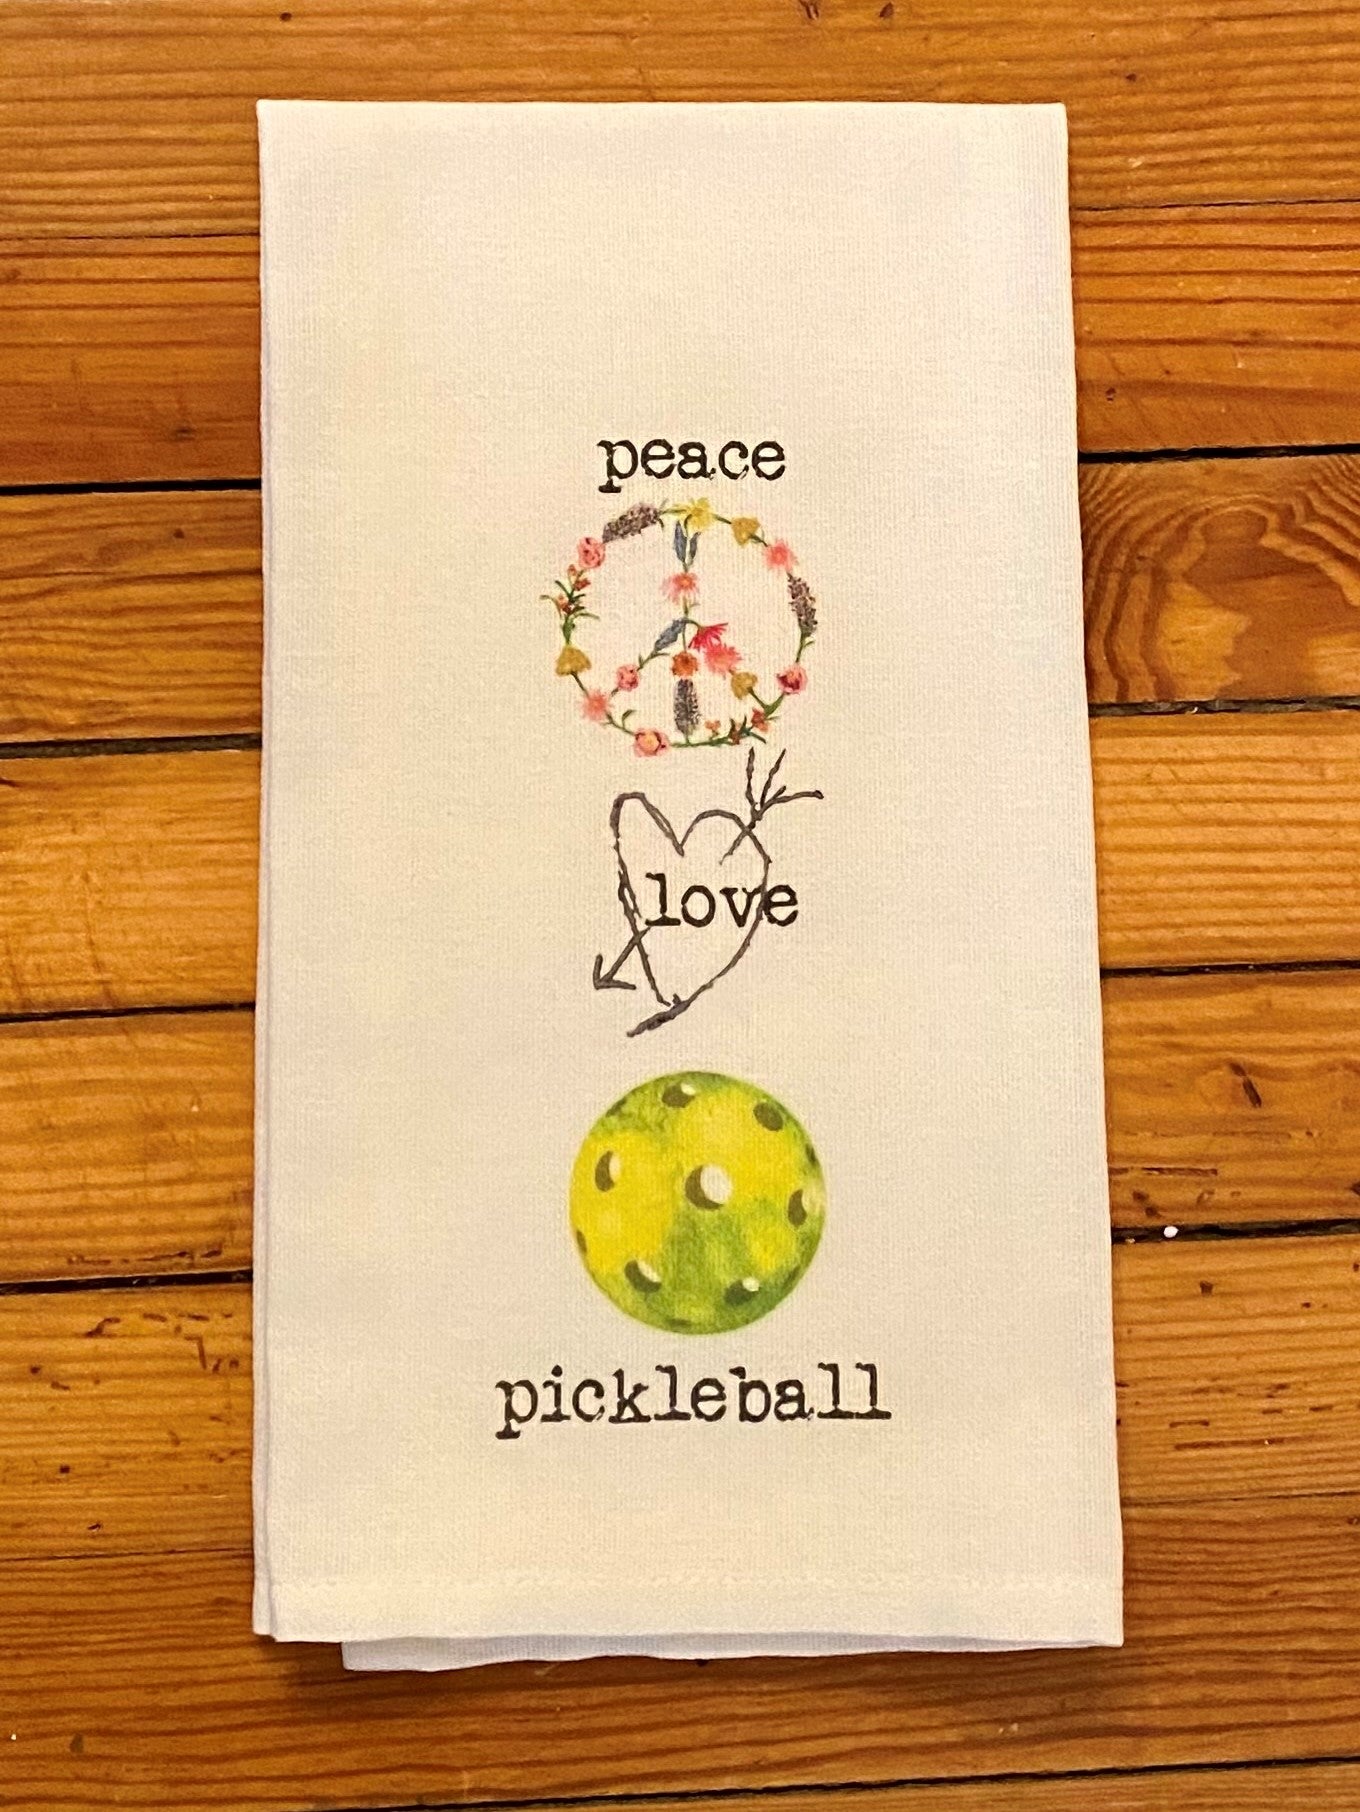 Calling all pickleball lovers! These are the cutest tea towels for one of the newest and fun sports around. These tea towels are 100% cotton and approximately 20x25 inch. You and your friends will love them!